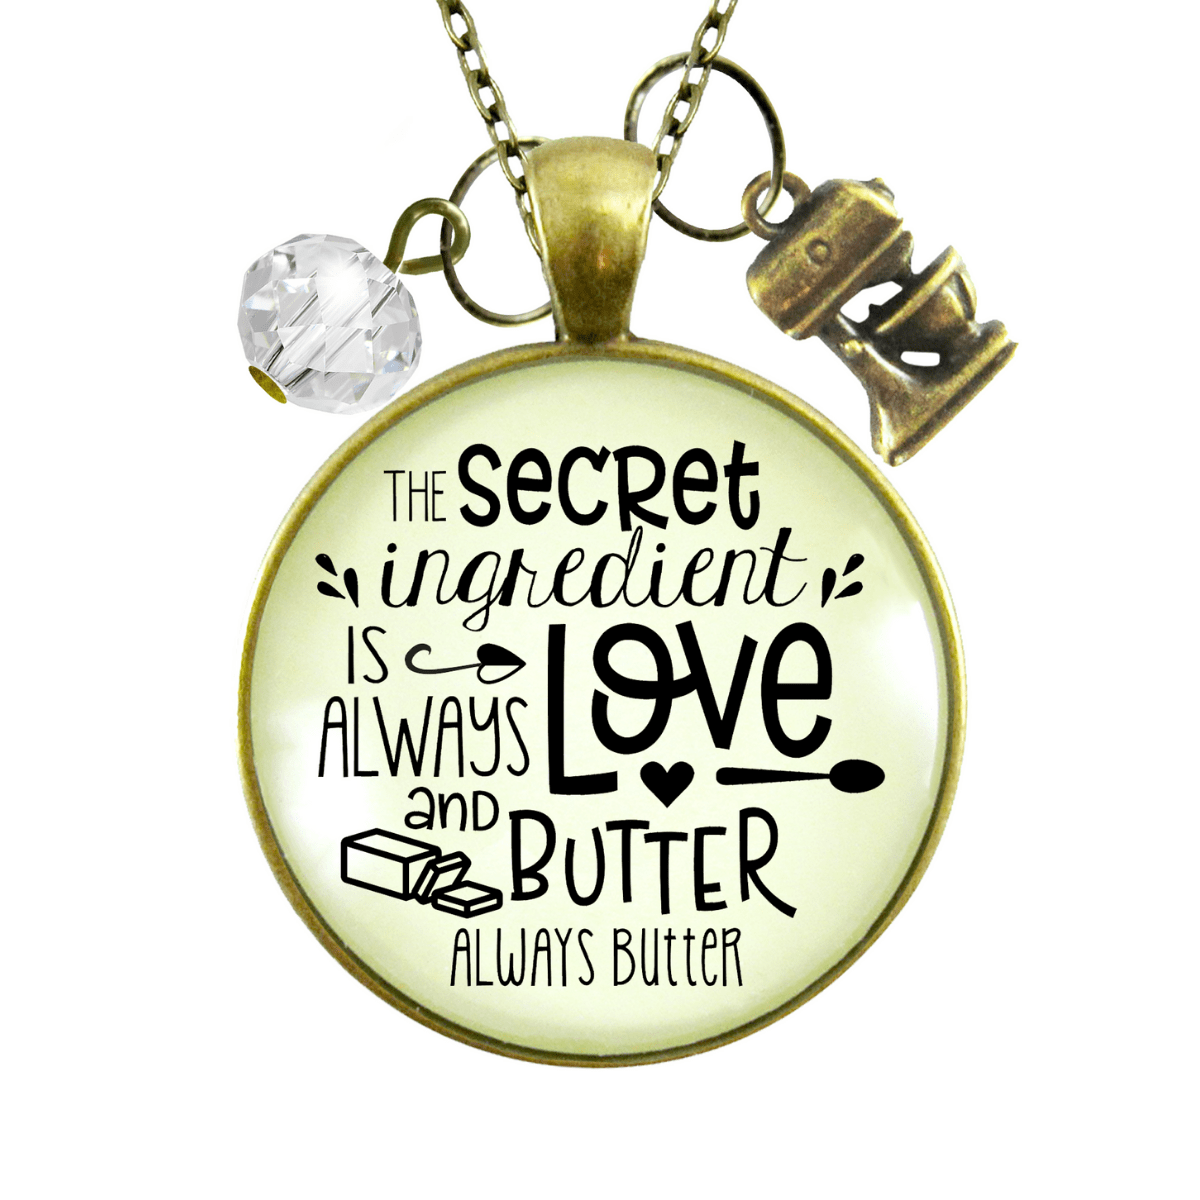 Gutsy Goodness Baking Necklace Secret Ingredient Love Butter Southern Food Jewelry Mixer Charm - Gutsy Goodness Handmade Jewelry;Baking Necklace Secret Ingredient Love Butter Southern Food Jewelry Mixer Charm - Gutsy Goodness Handmade Jewelry Gifts